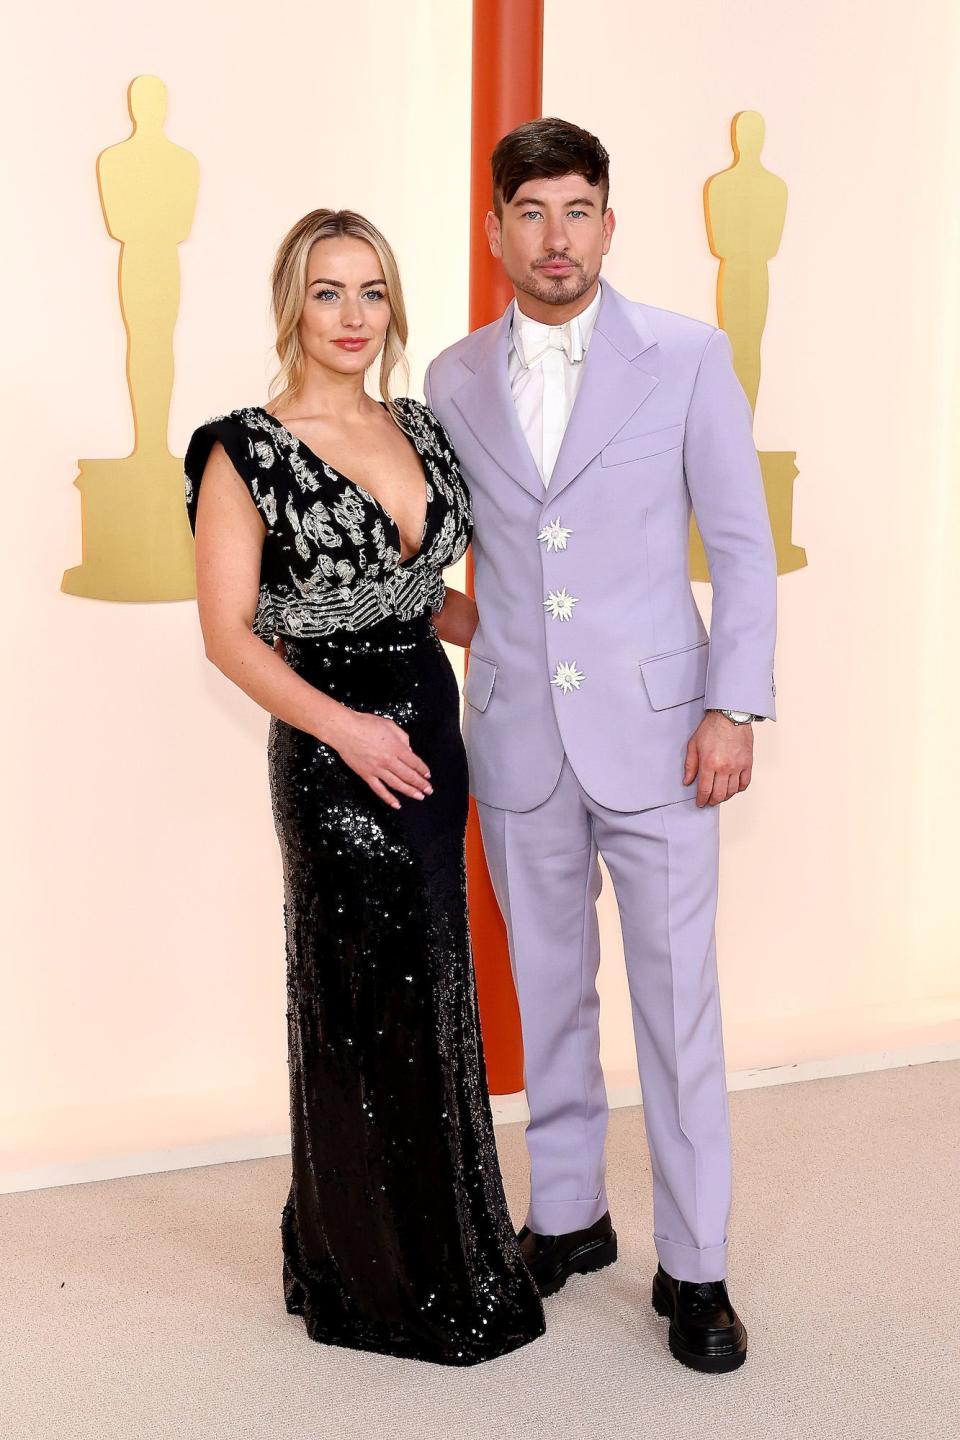 Alyson Kierans and Barry Keoghan attend the 2023 Academy Awards.